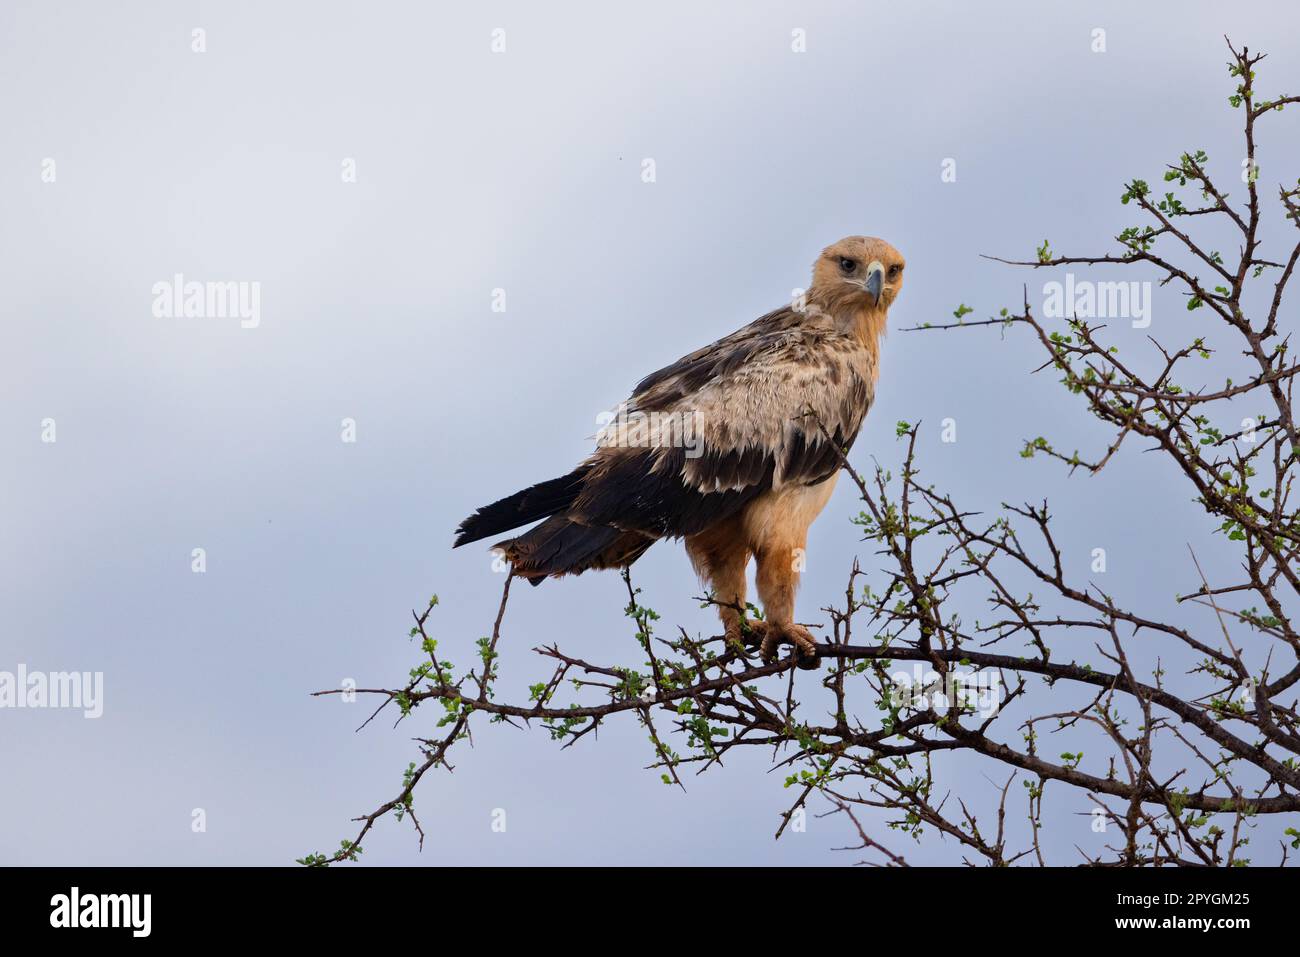 A majestic Tawny Eagle is captured perched on the top of a tree, its sharp eyes scanning the vast savannah of the Kenyan Tsavo East reserve. The blue Stock Photo